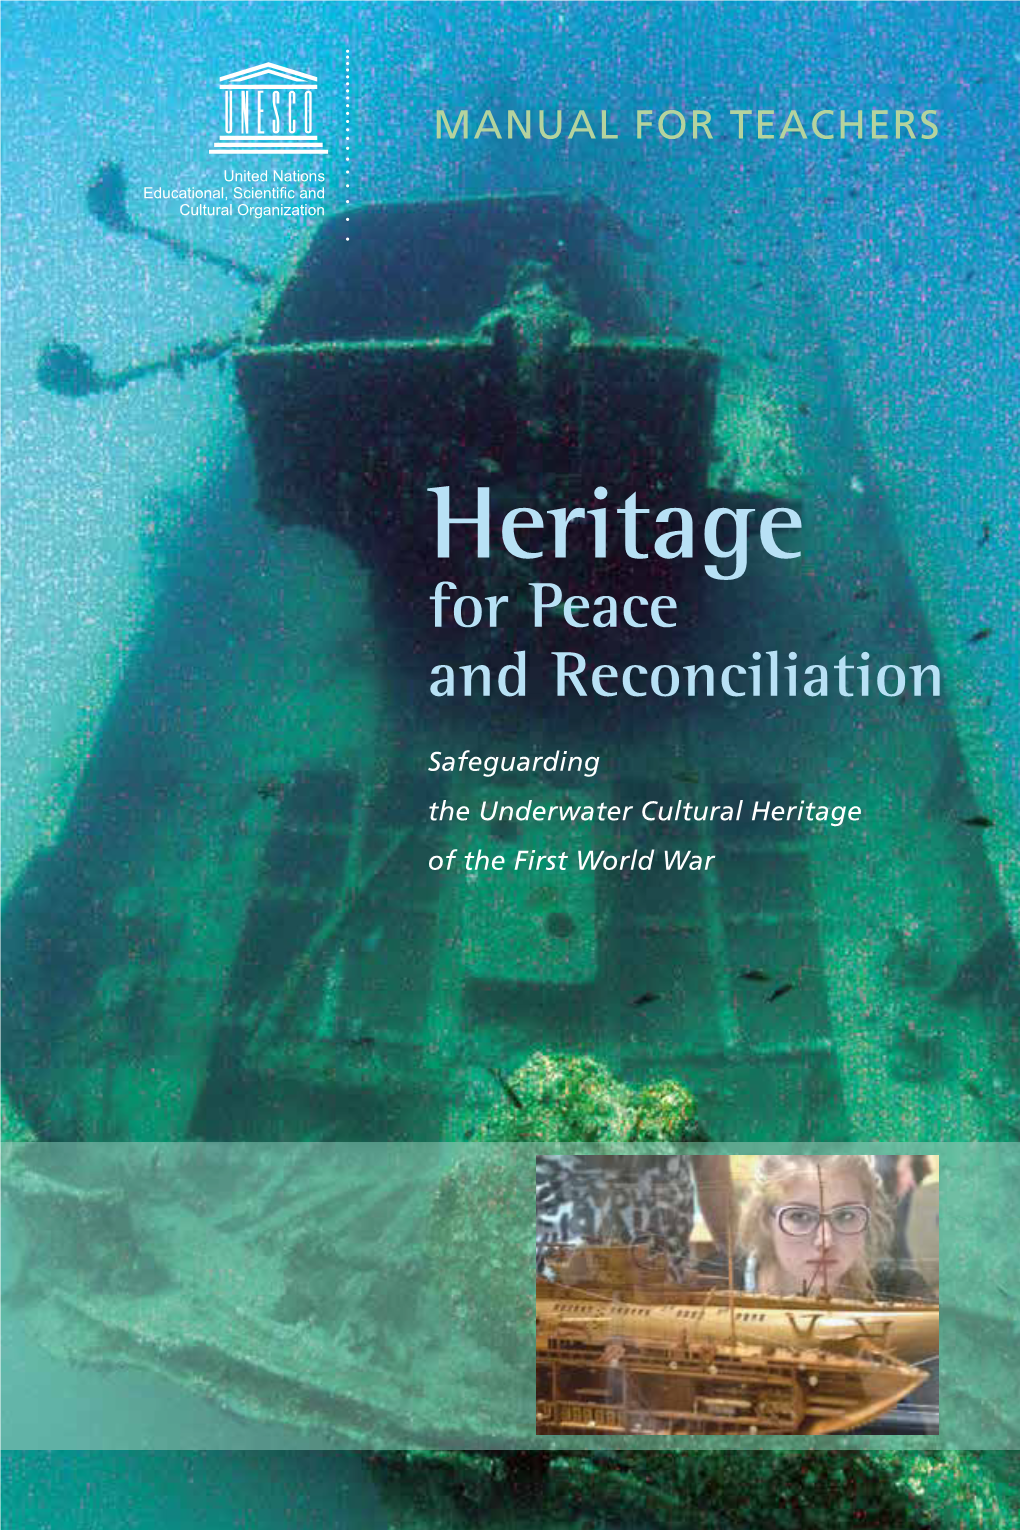 Heritage for Peace and Reconciliation